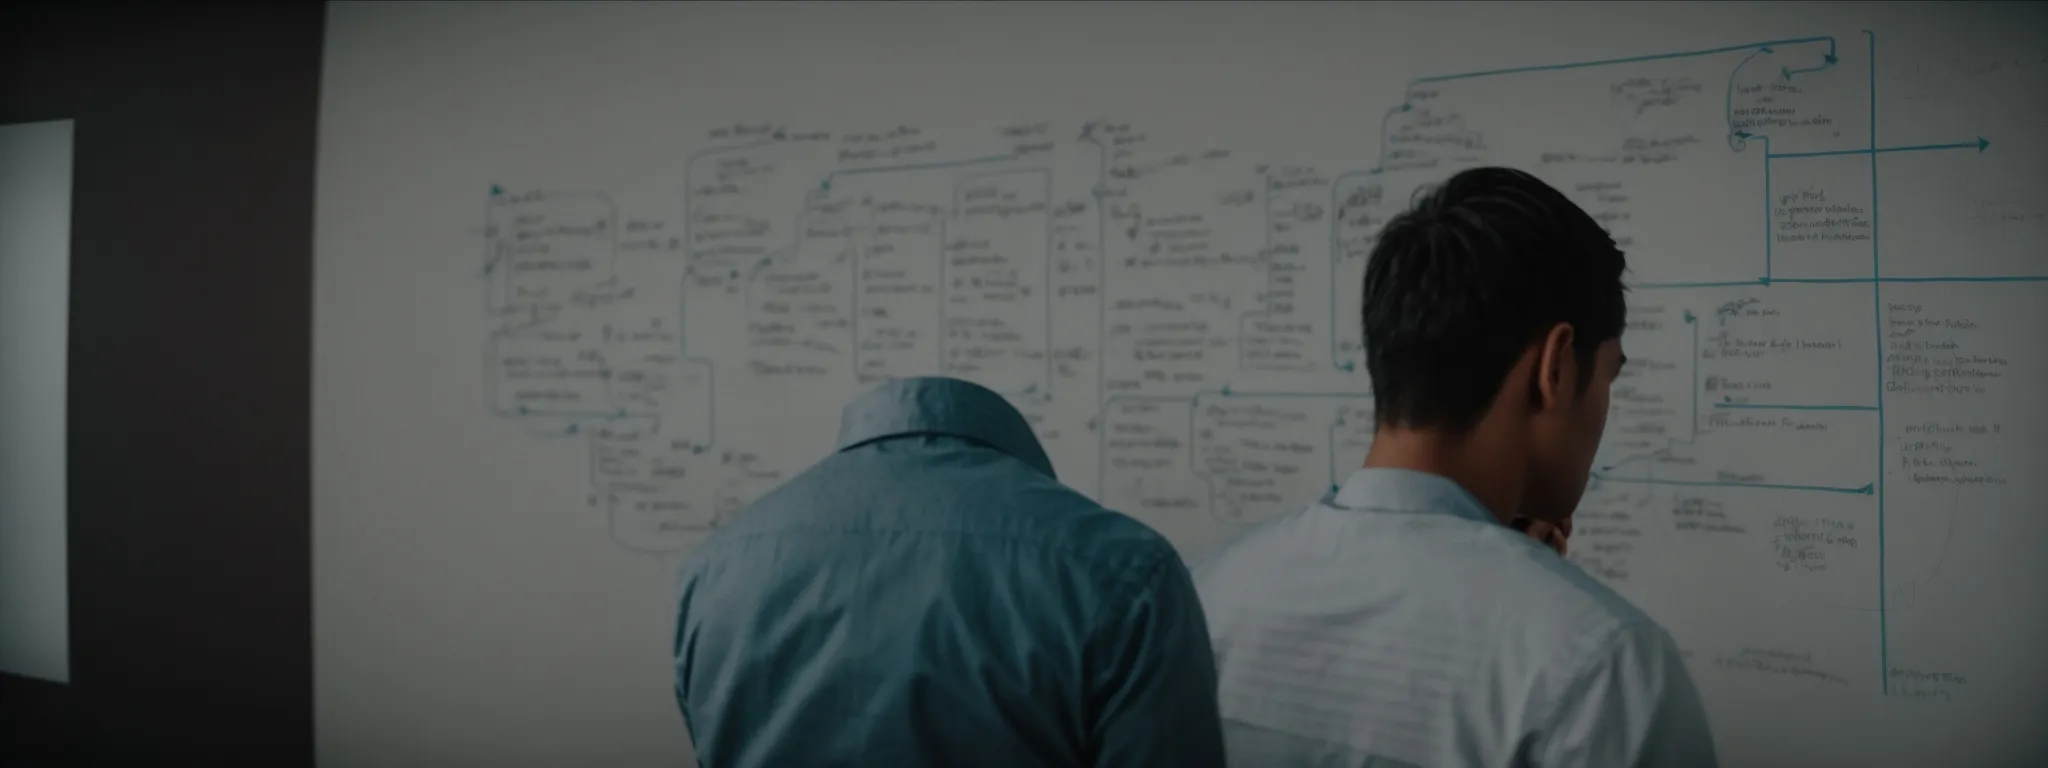 a person contemplating a complex flowchart representing search engine algorithms on a whiteboard.